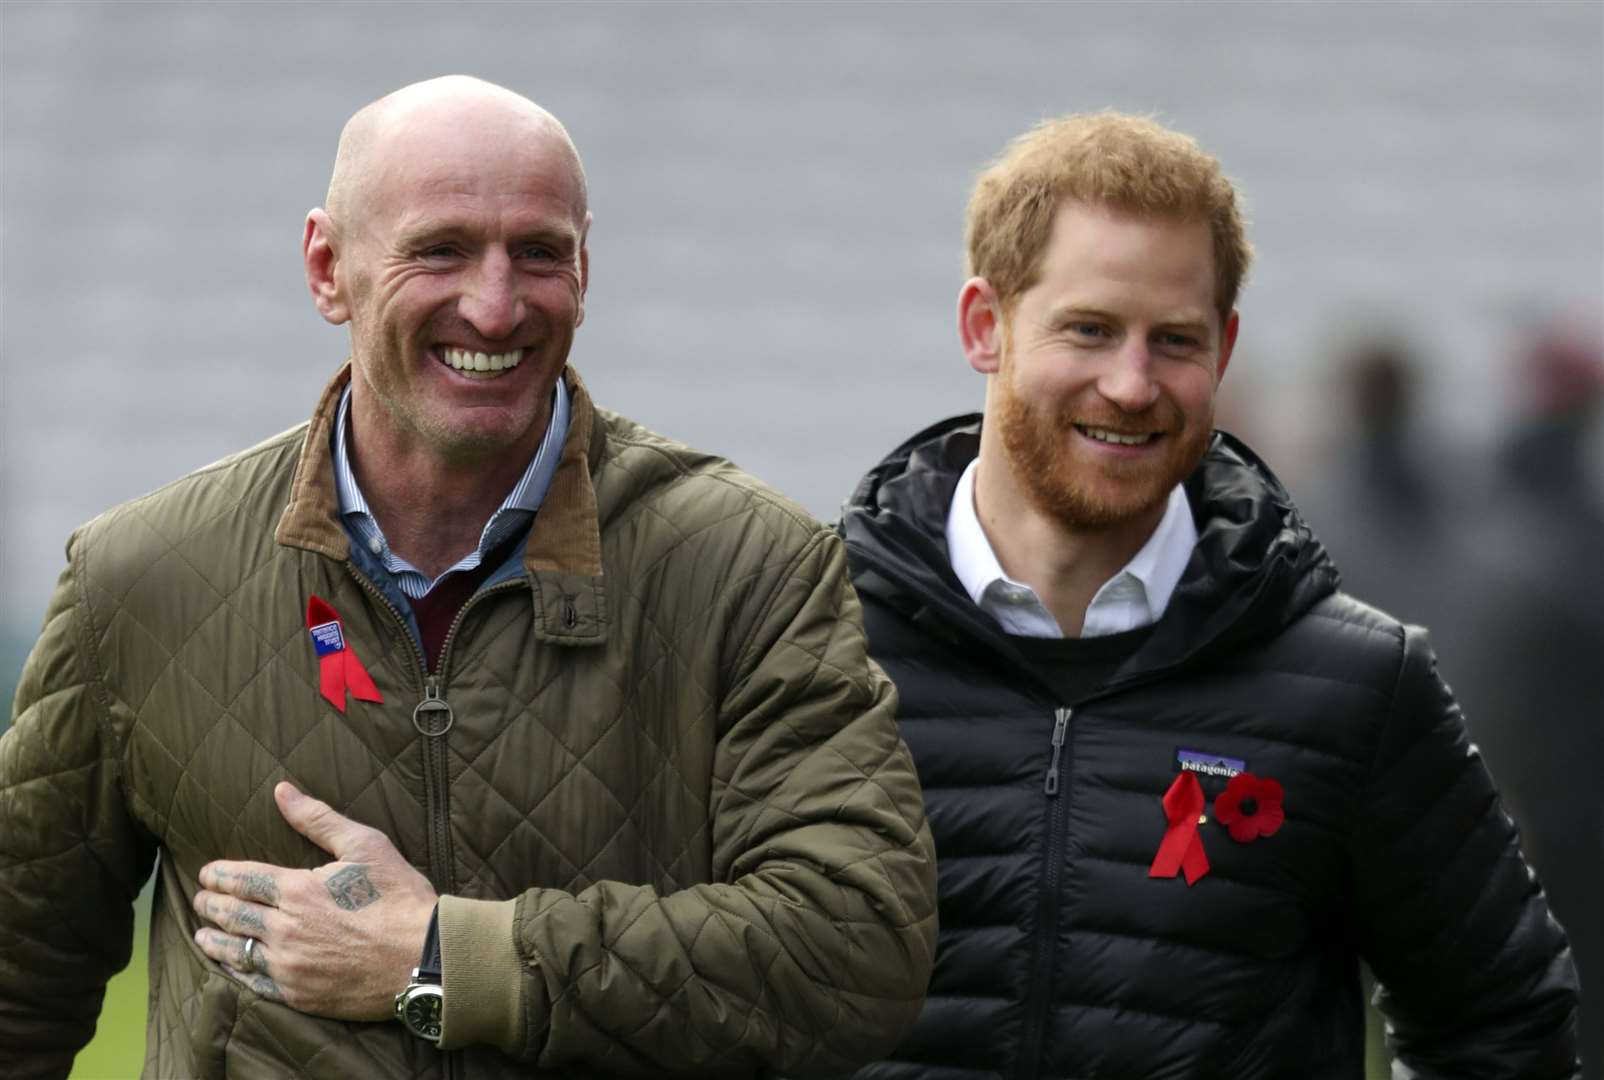 The Duke of Sussex (right) attends a Terrence Higgins Trust event with former Wales rugby captain Gareth Thomas (left) at the Stoop, Twickenham, ahead of National HIV Testing Week (PA)